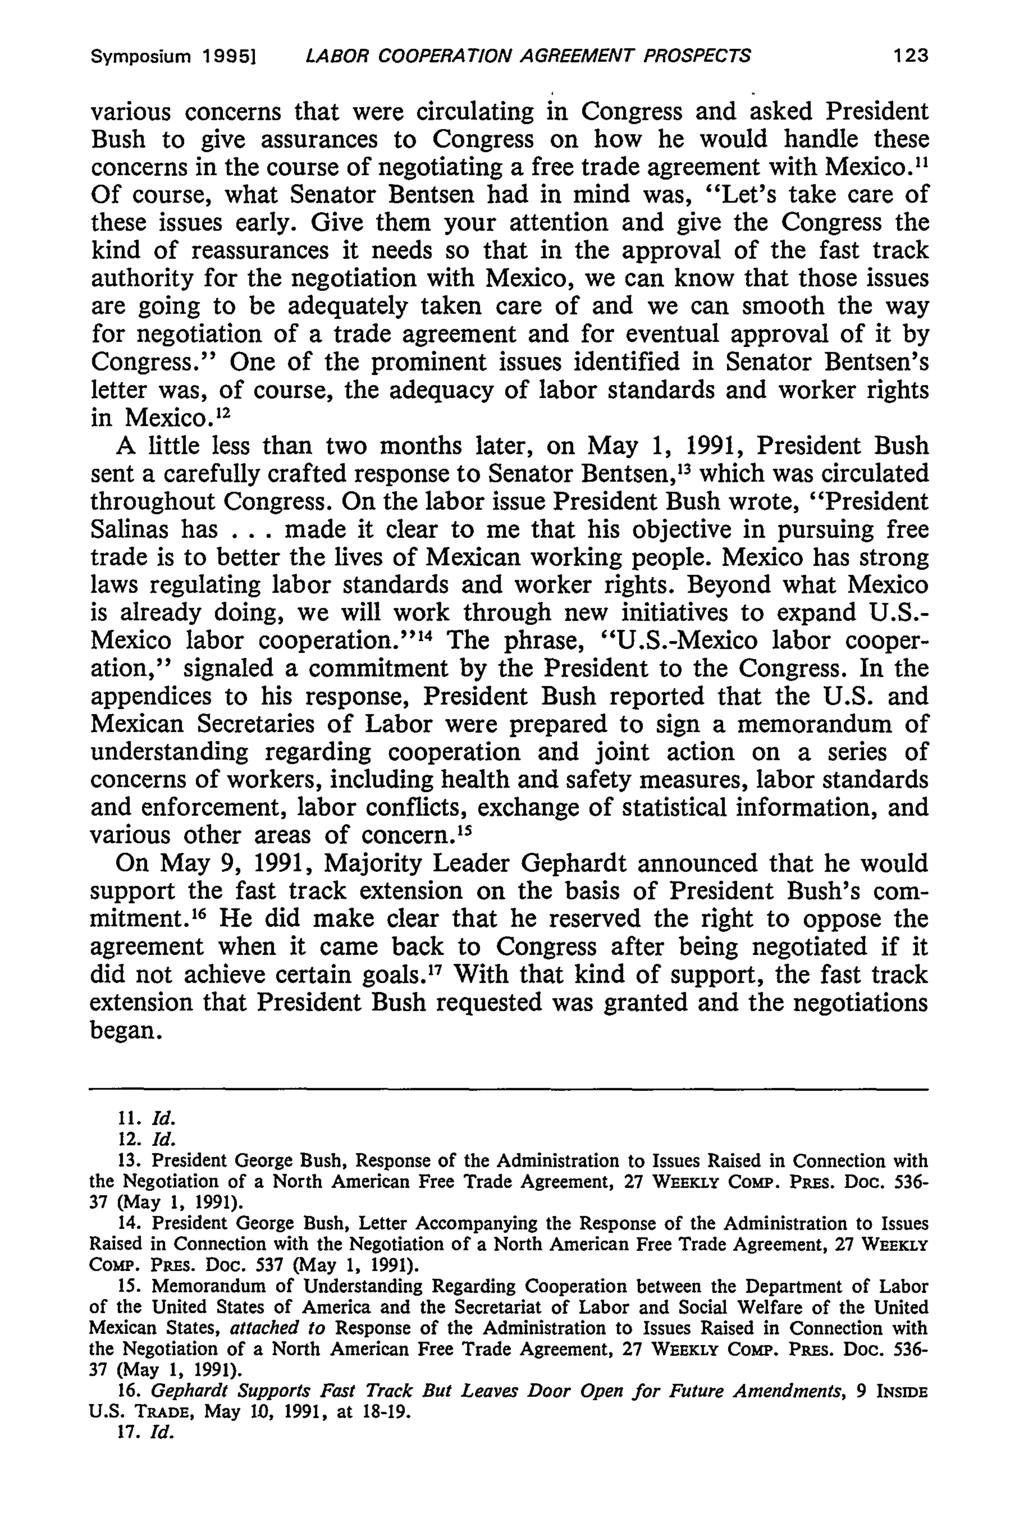 Symposium 1995] LABOR COOPERATION AGREEMENT PROSPECTS various concerns that were circulating in Congress and asked President Bush to give assurances to Congress on how he would handle these concerns